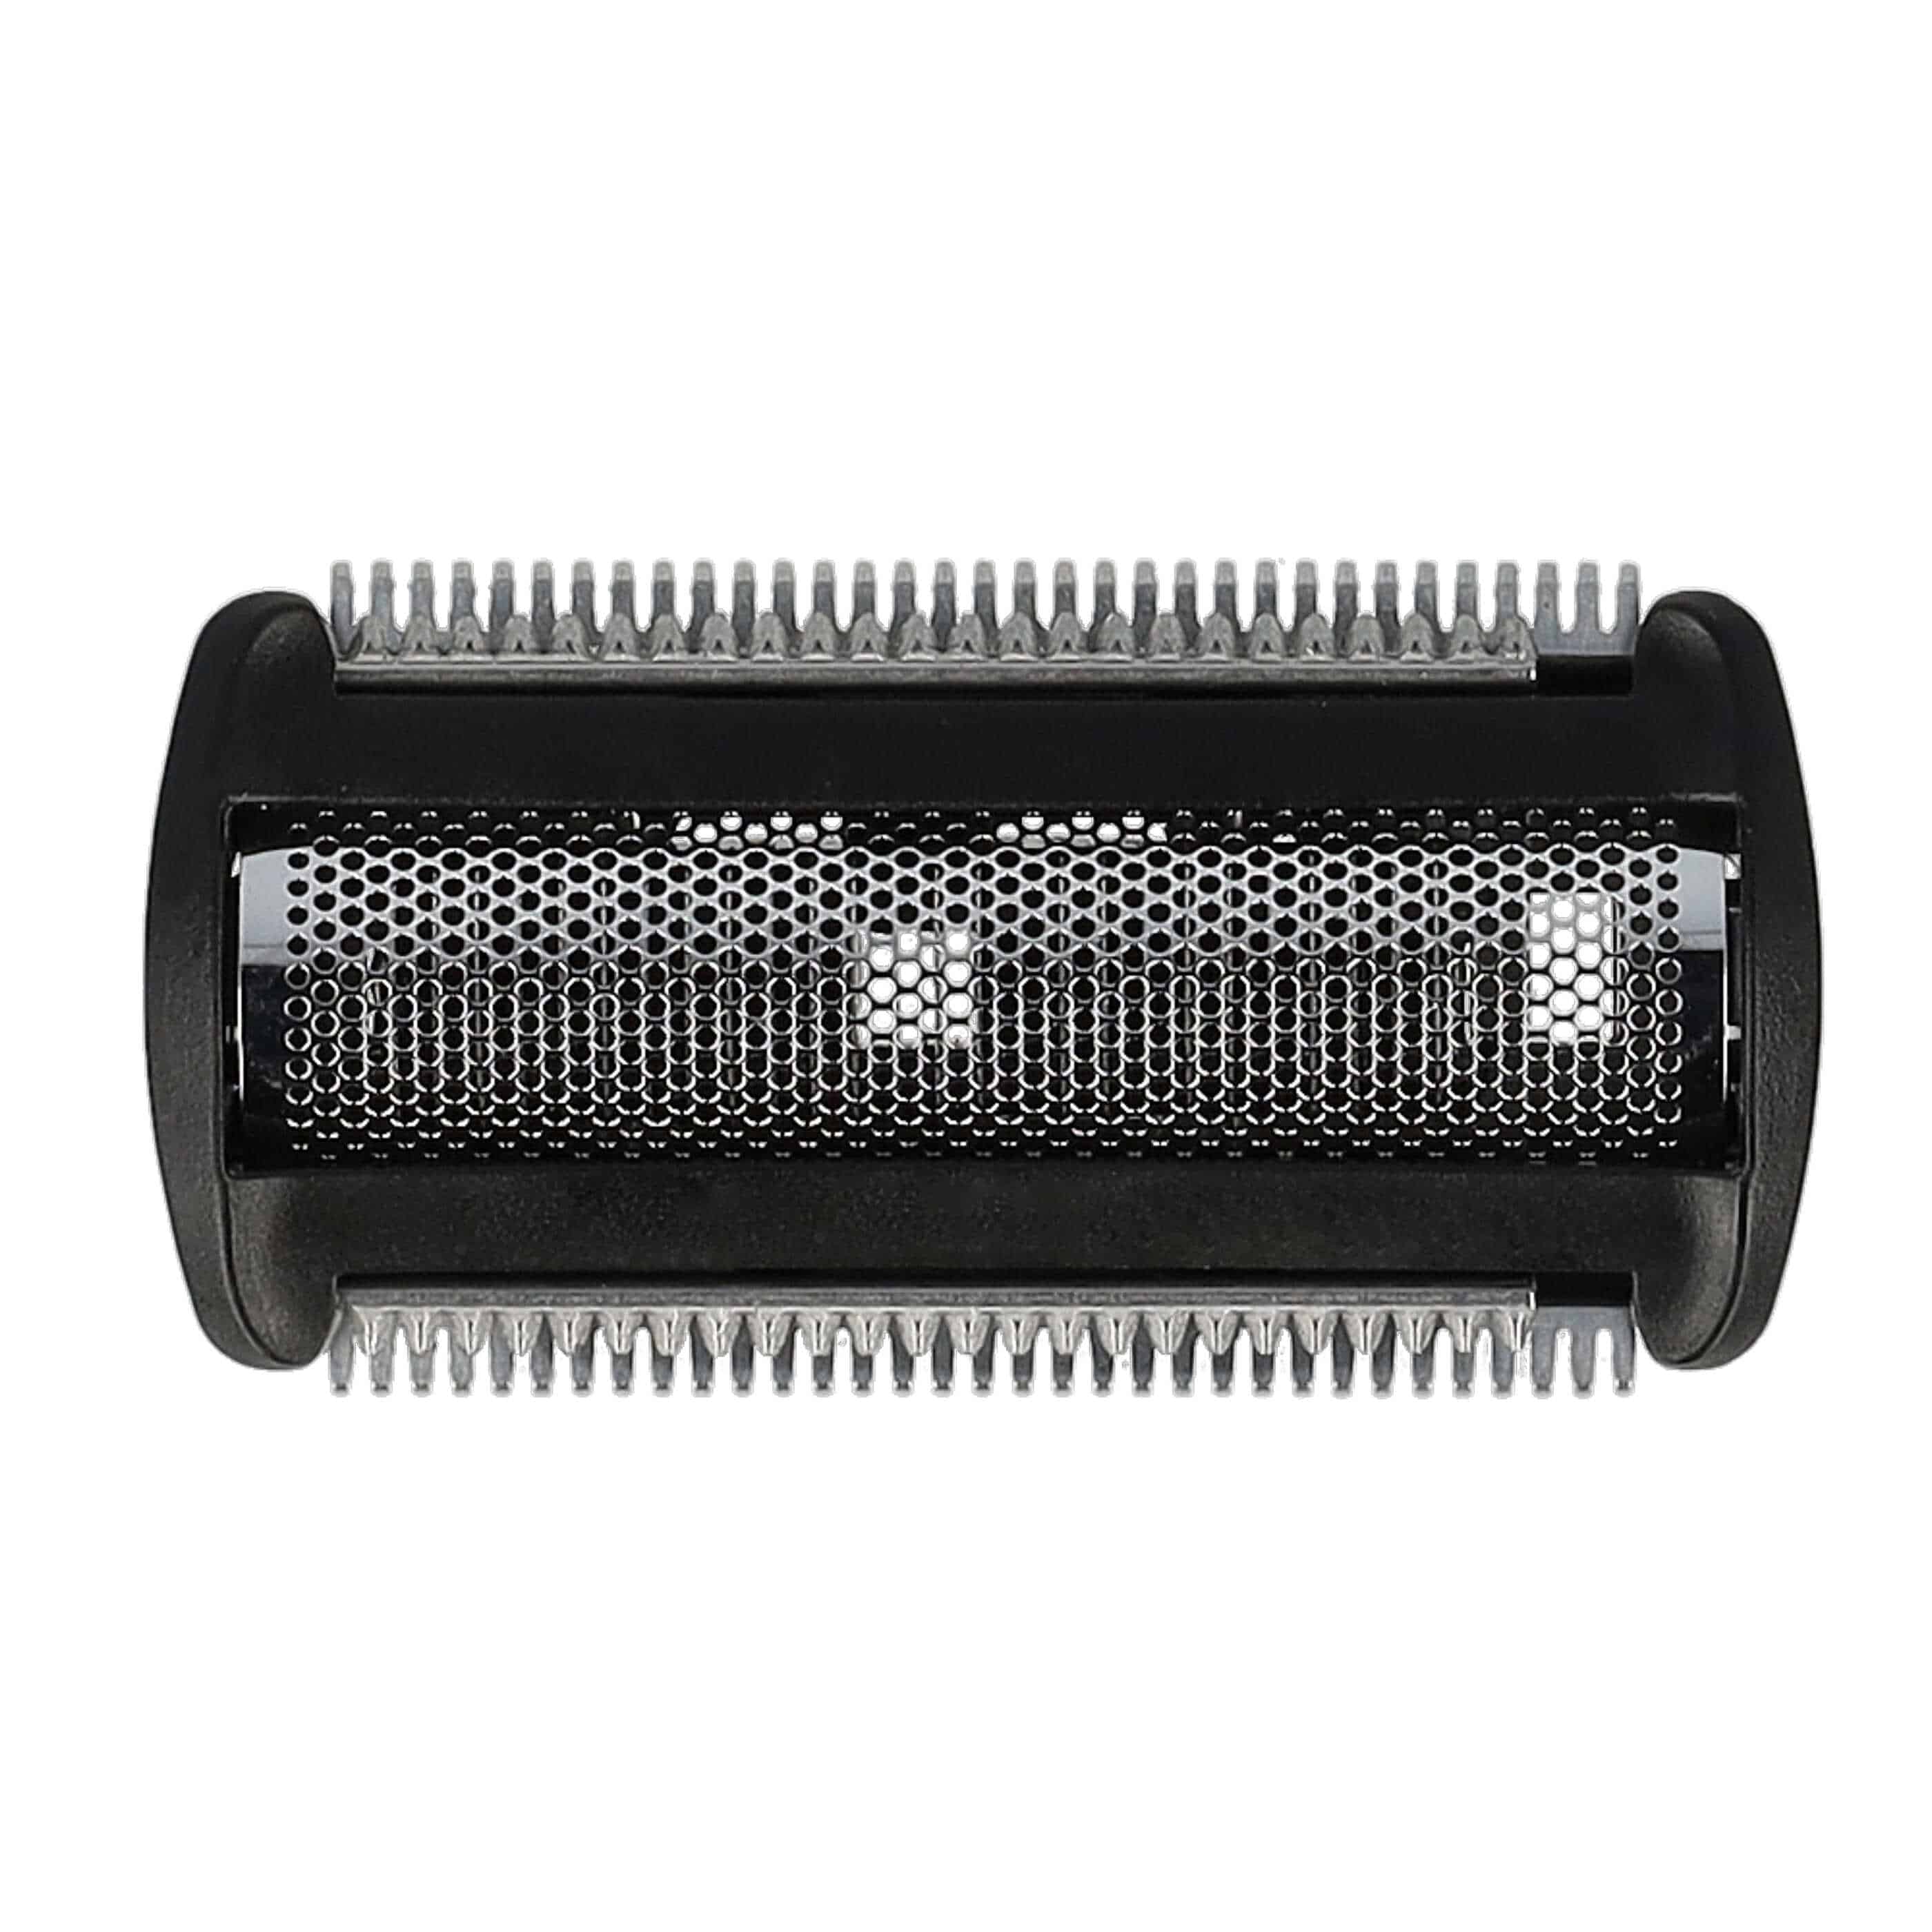 2x Shaving Heads replaces Philips 420303551110, HQ1072/01, HQ1072 for PhilipsElectric Razor, black / silver